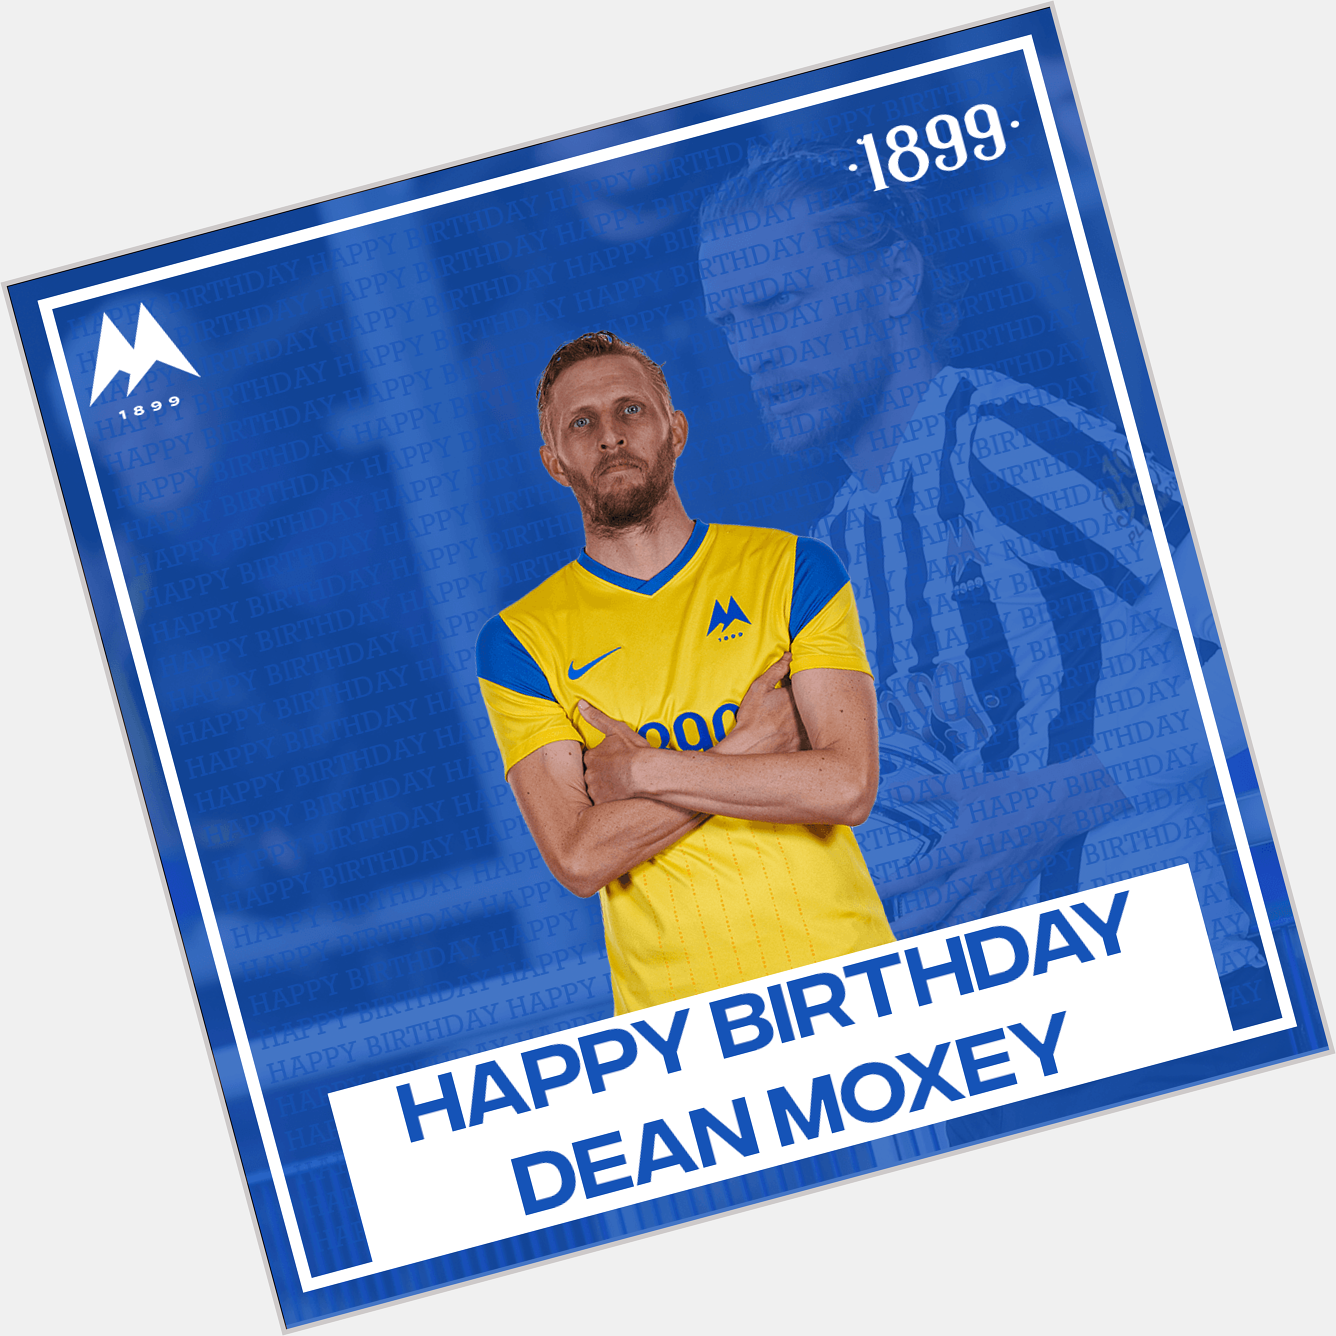  Happy Birthday to United No.2 1 Dean Moxey!

Have a good one Dean!  